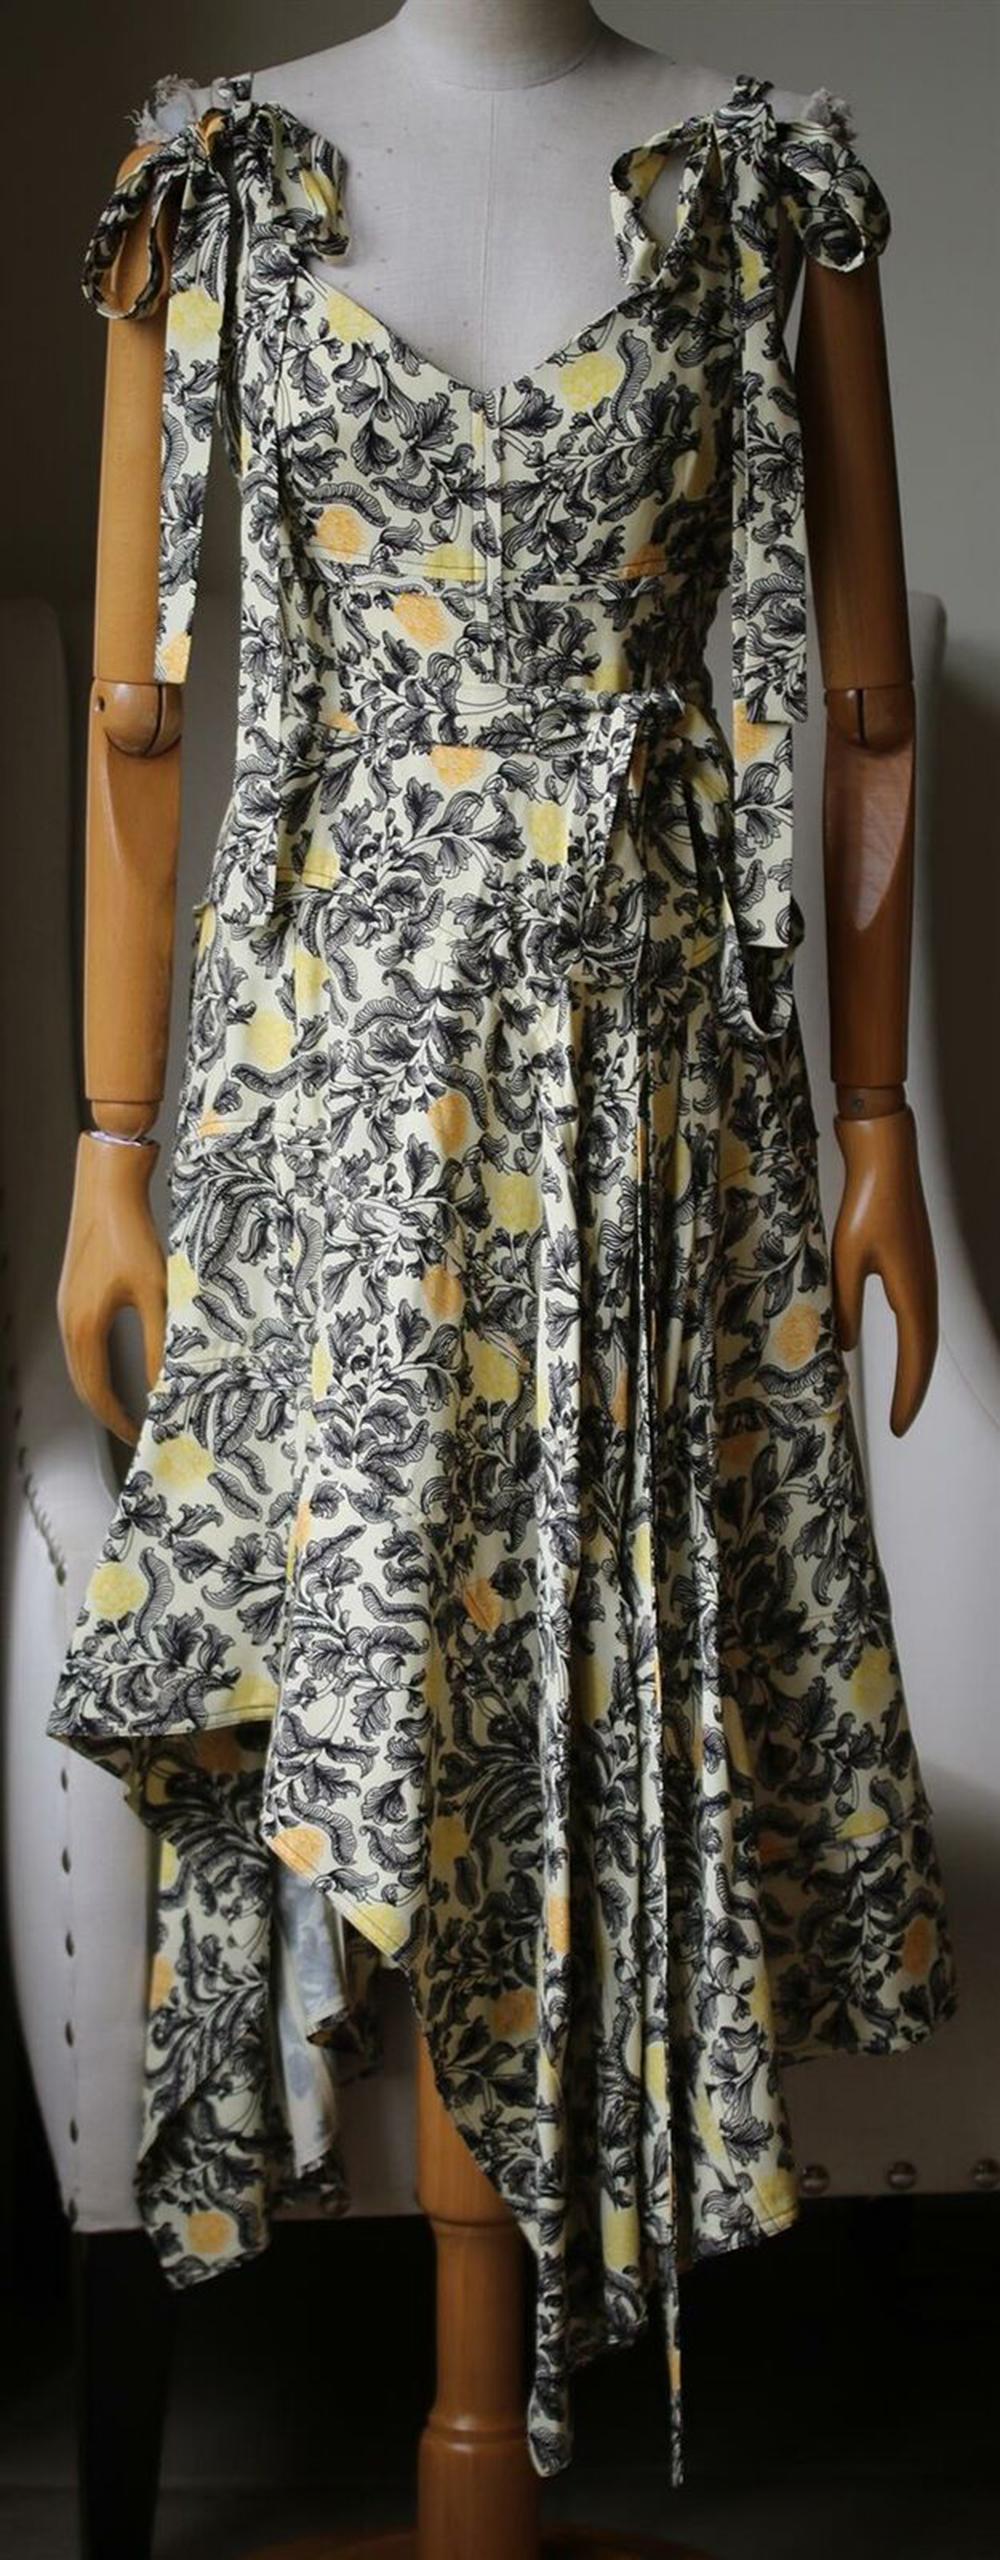 Printed with monochrome leaves and blooms that look as though they've been drawn by hand, this georgette midi dress falls to an asymmetric hem and has tie-fastening shoulder straps so you can adjust the fit. Multicolored georgette. Concealed zip